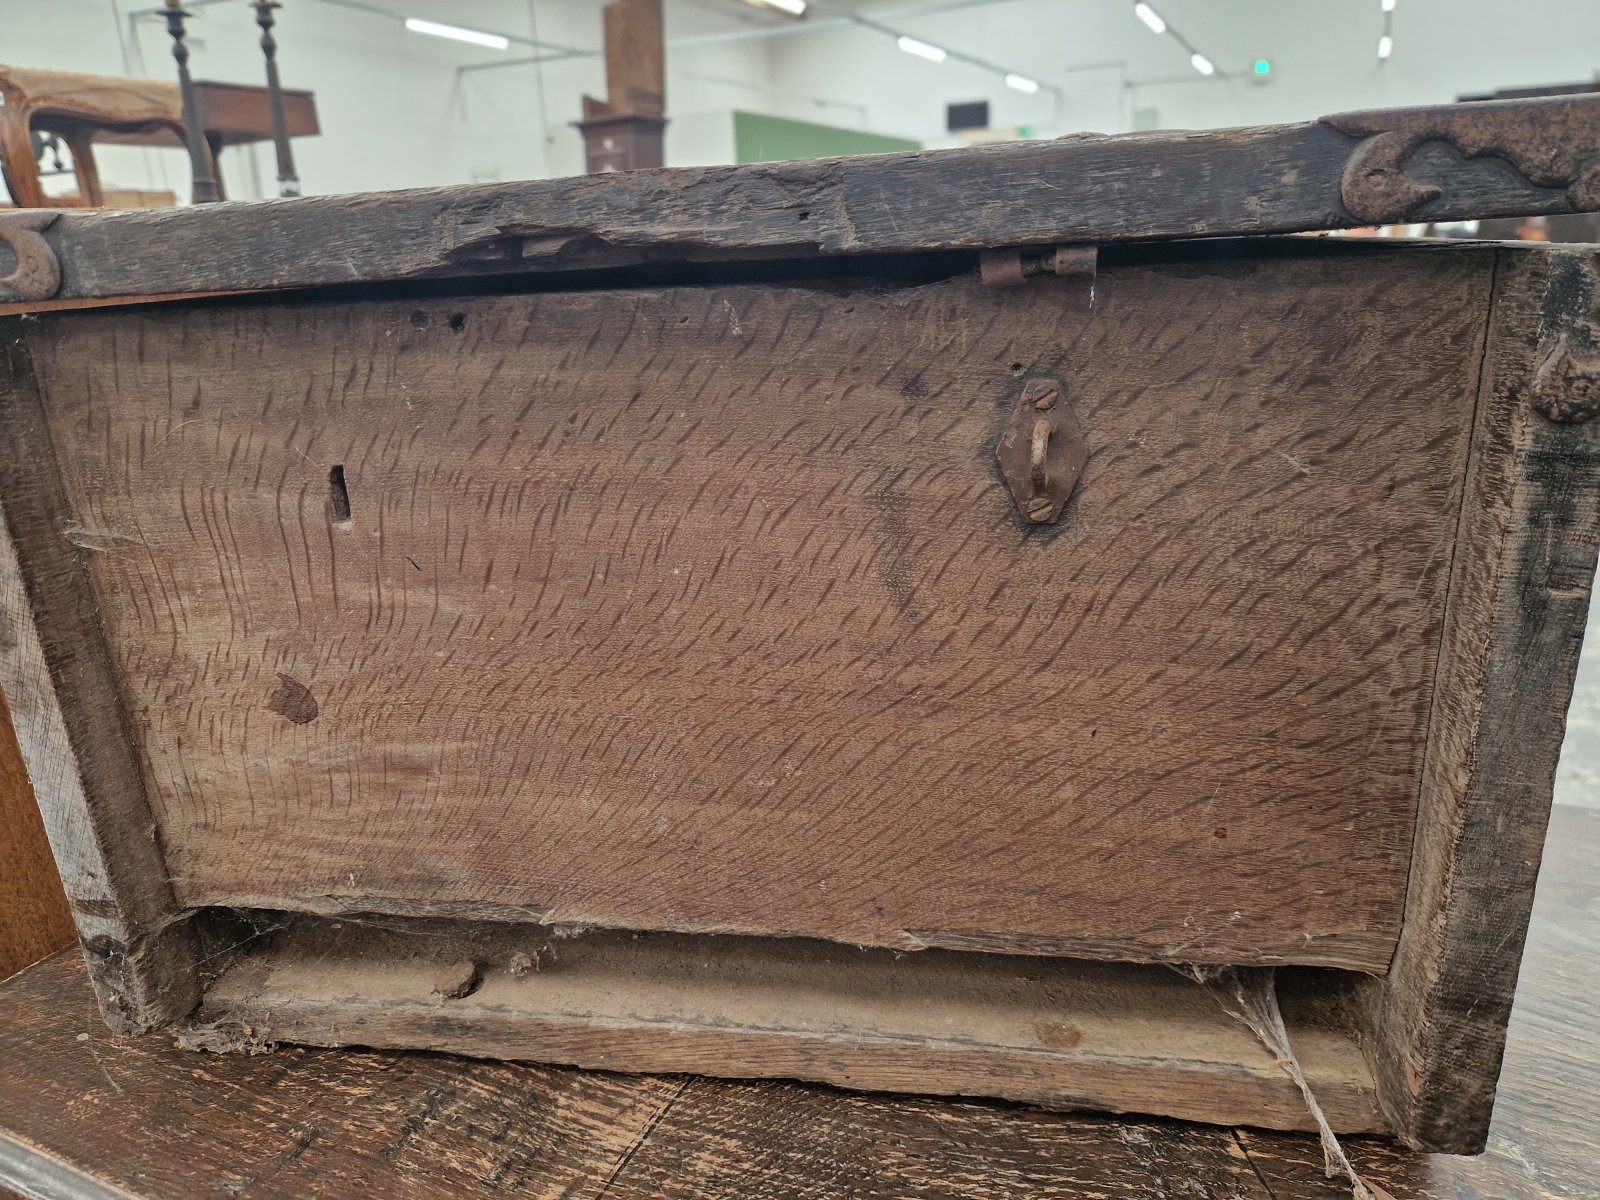 AN IRON BOUND TWO HANDLED OAK STRONG BOX BEARING THE DATE 1689 INSIDE THE HINGED LID - Image 7 of 7